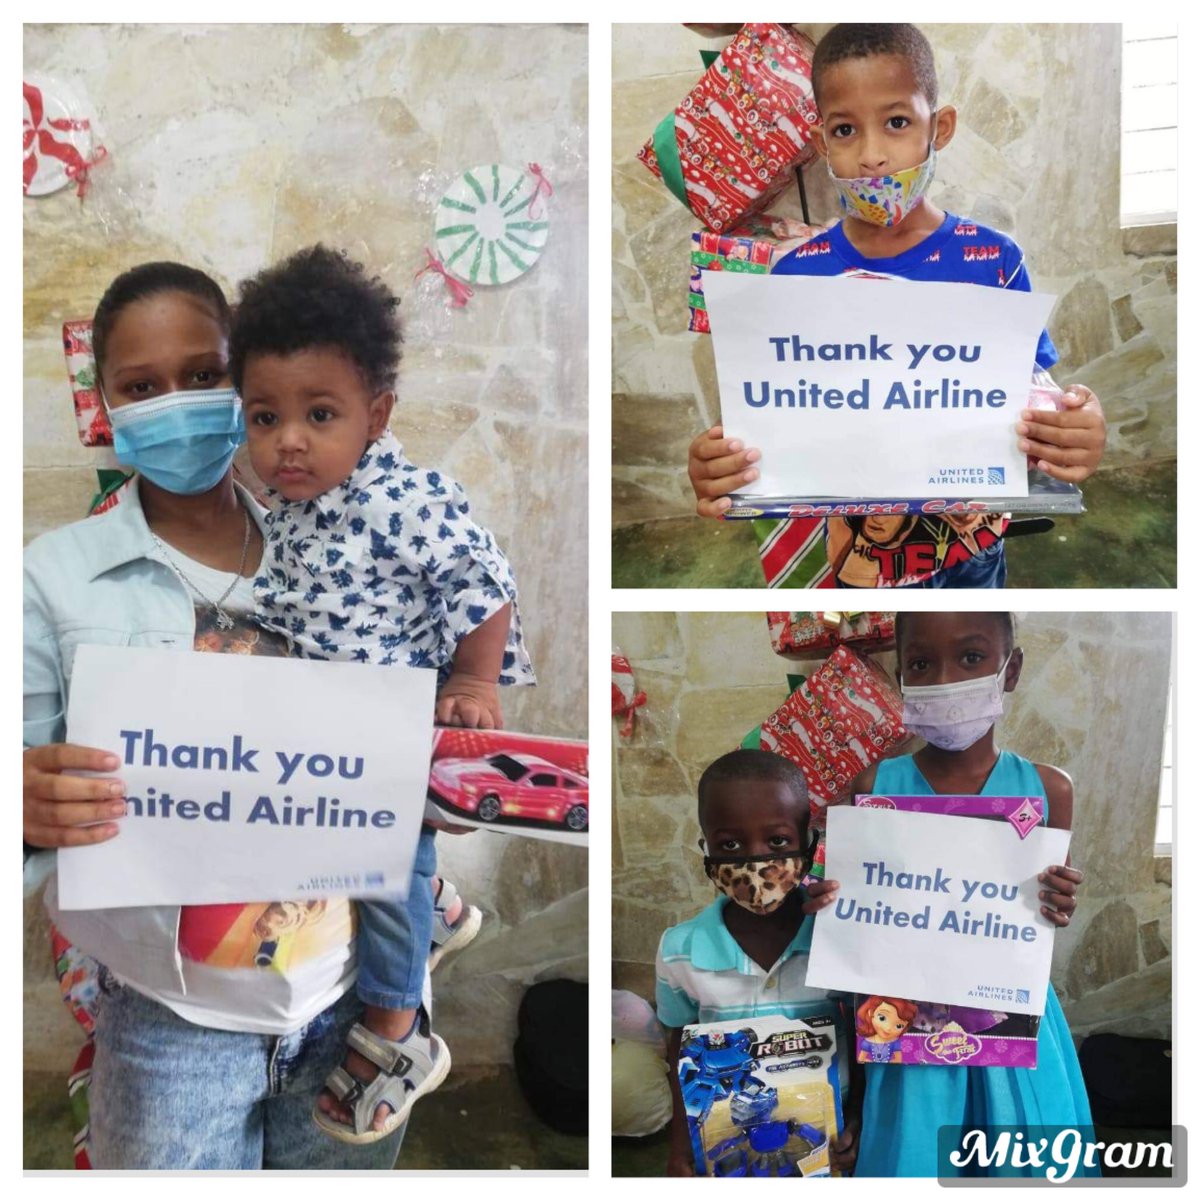 The below children, plus many more, send their thanks and love to United Airlines, especially ⁦@mtmorais28⁩ ⁦@susannesworld⁩ for ensuring they received their toys in SDQ. #Ewrproud #beingunited